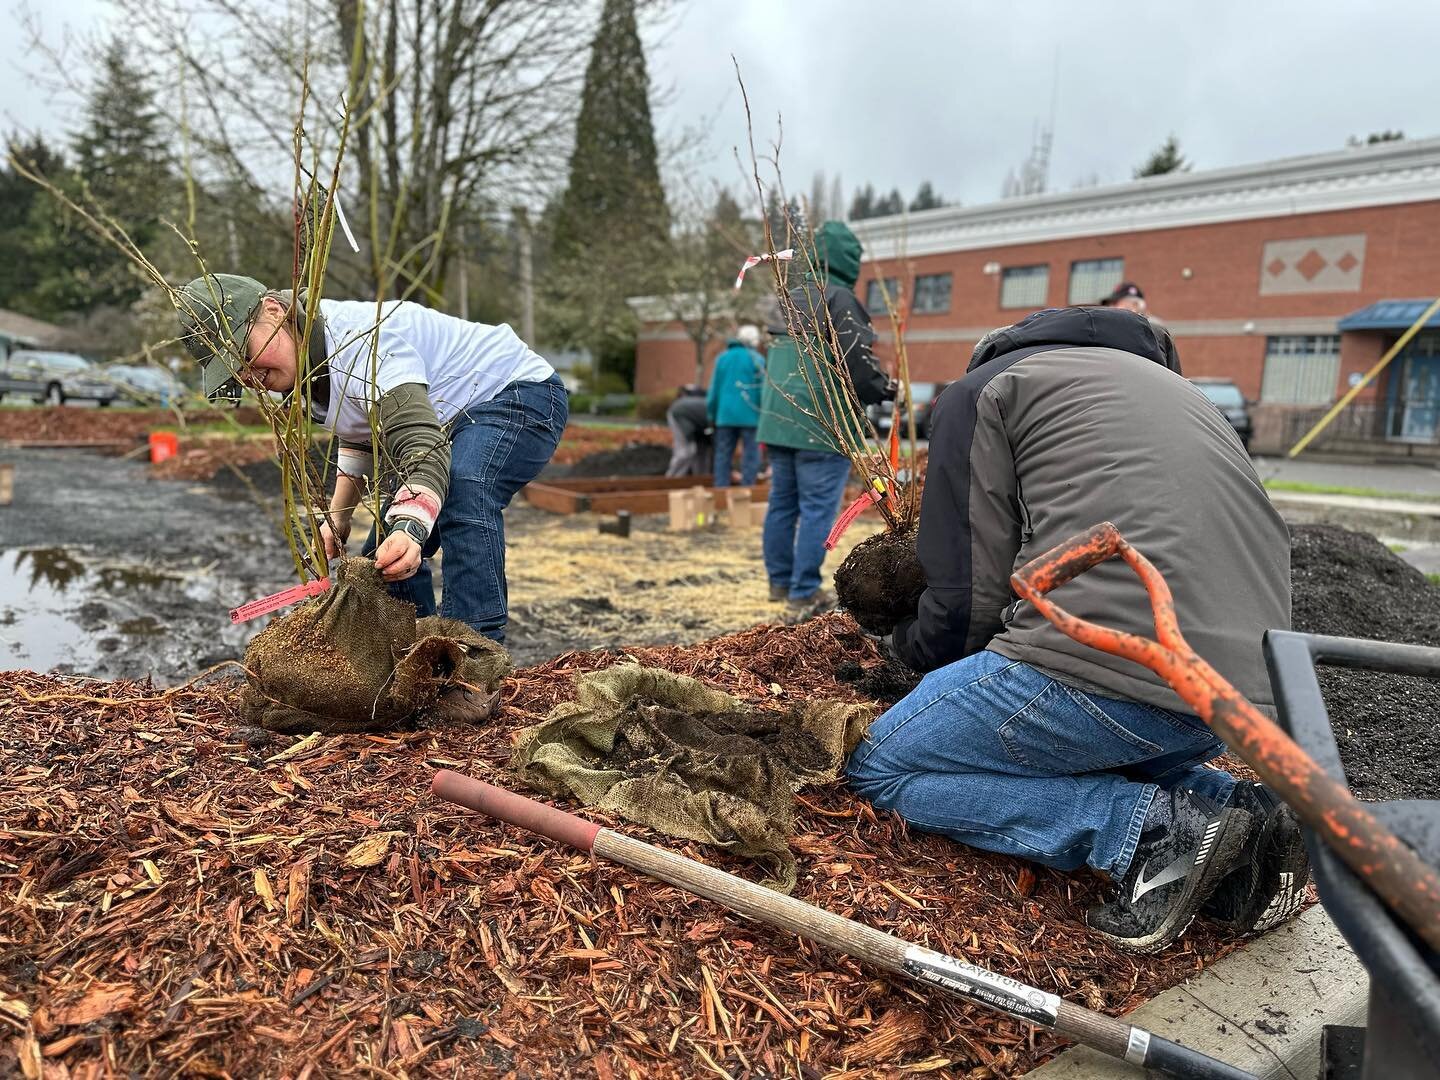 Thank you to the 40+ volunteers that spent Earth Day 🌎 planting a pollinator garden and food forest for our community to enjoy for years to come. A big thank you to Mason Conservation District for getting this funded, planned and completed. Come out